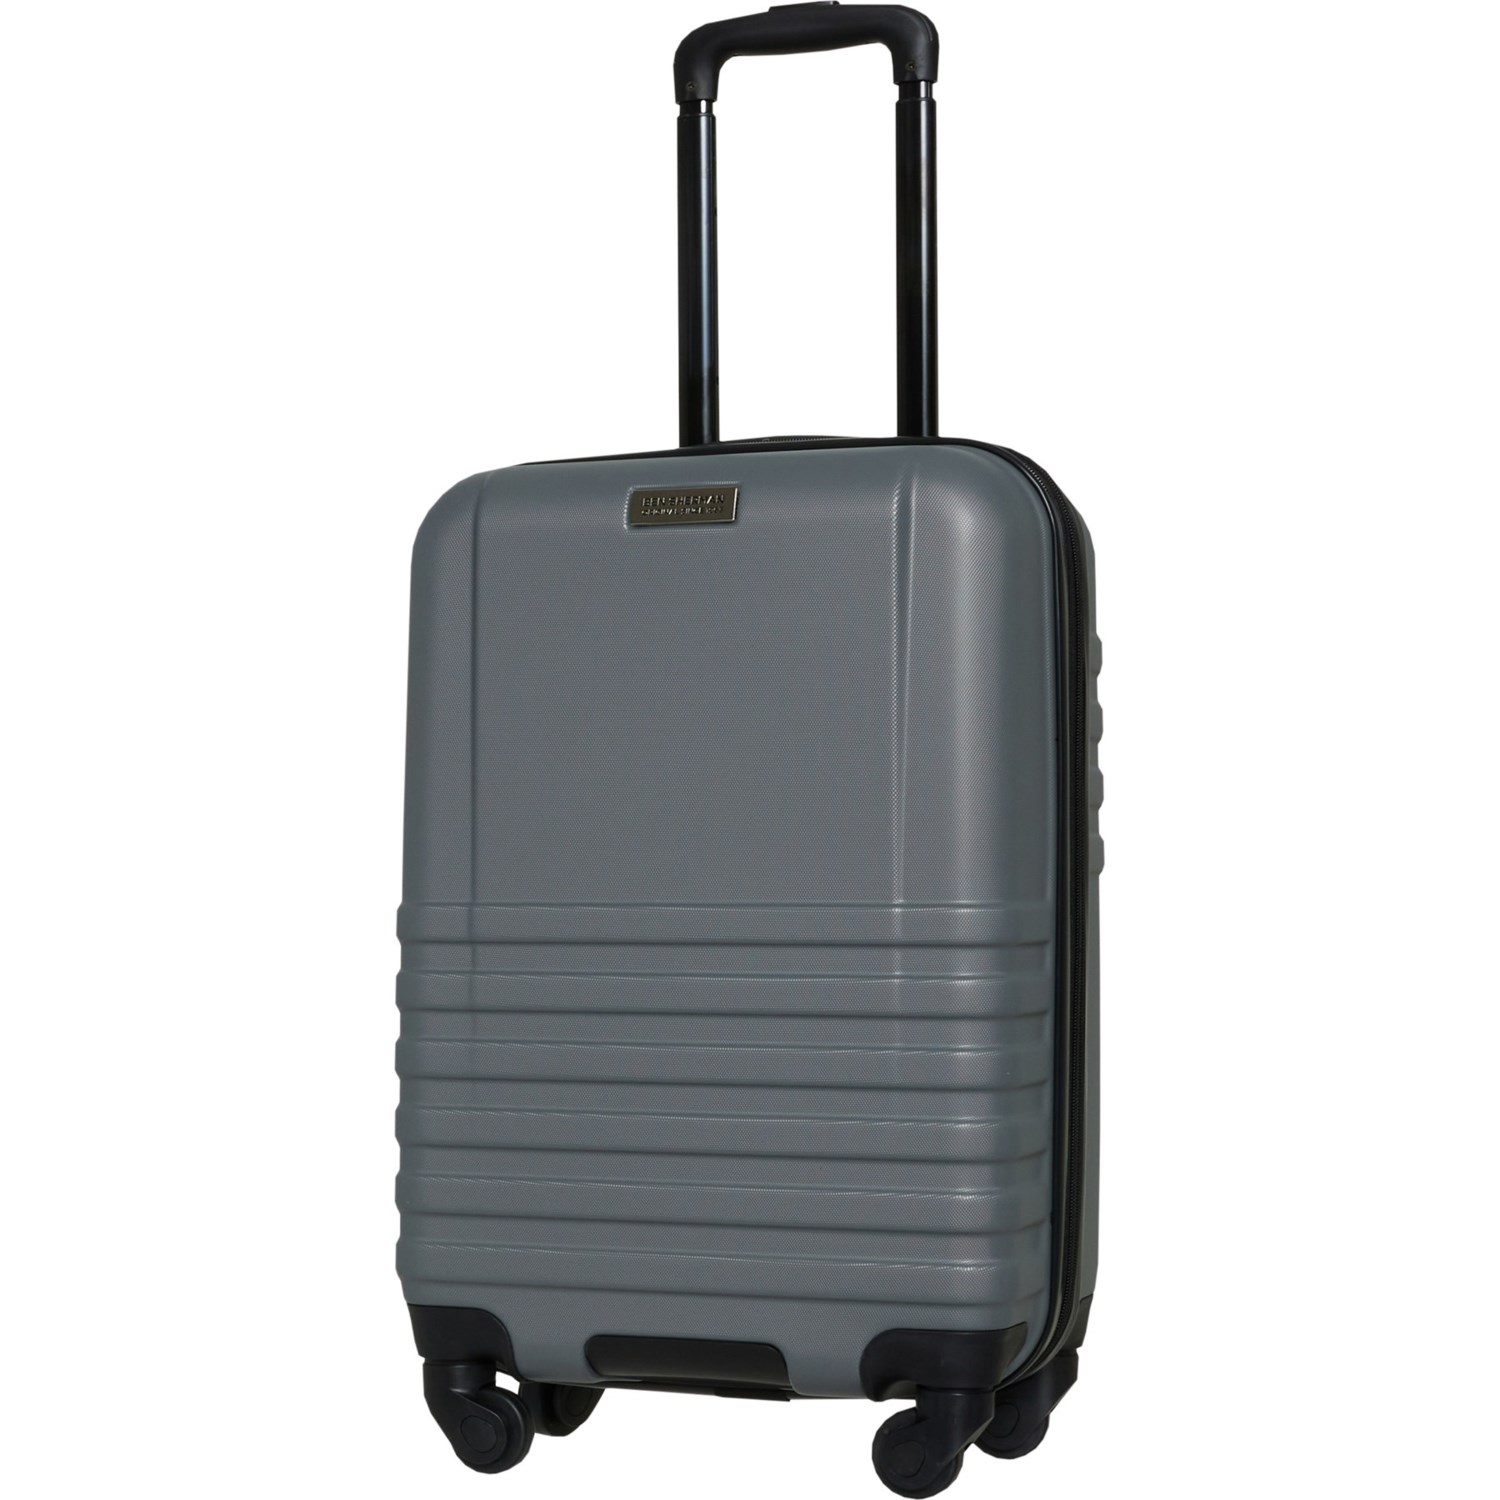 () ٥󥷥㡼ޥ 20 إե ꡼ ԥʡ ĥ - ϡɥ, ѥ֥, 쥤 Ben Sherman 20 Hereford Carry-On Spinner Suitcase - Hardside, Expandable, Grey Grey